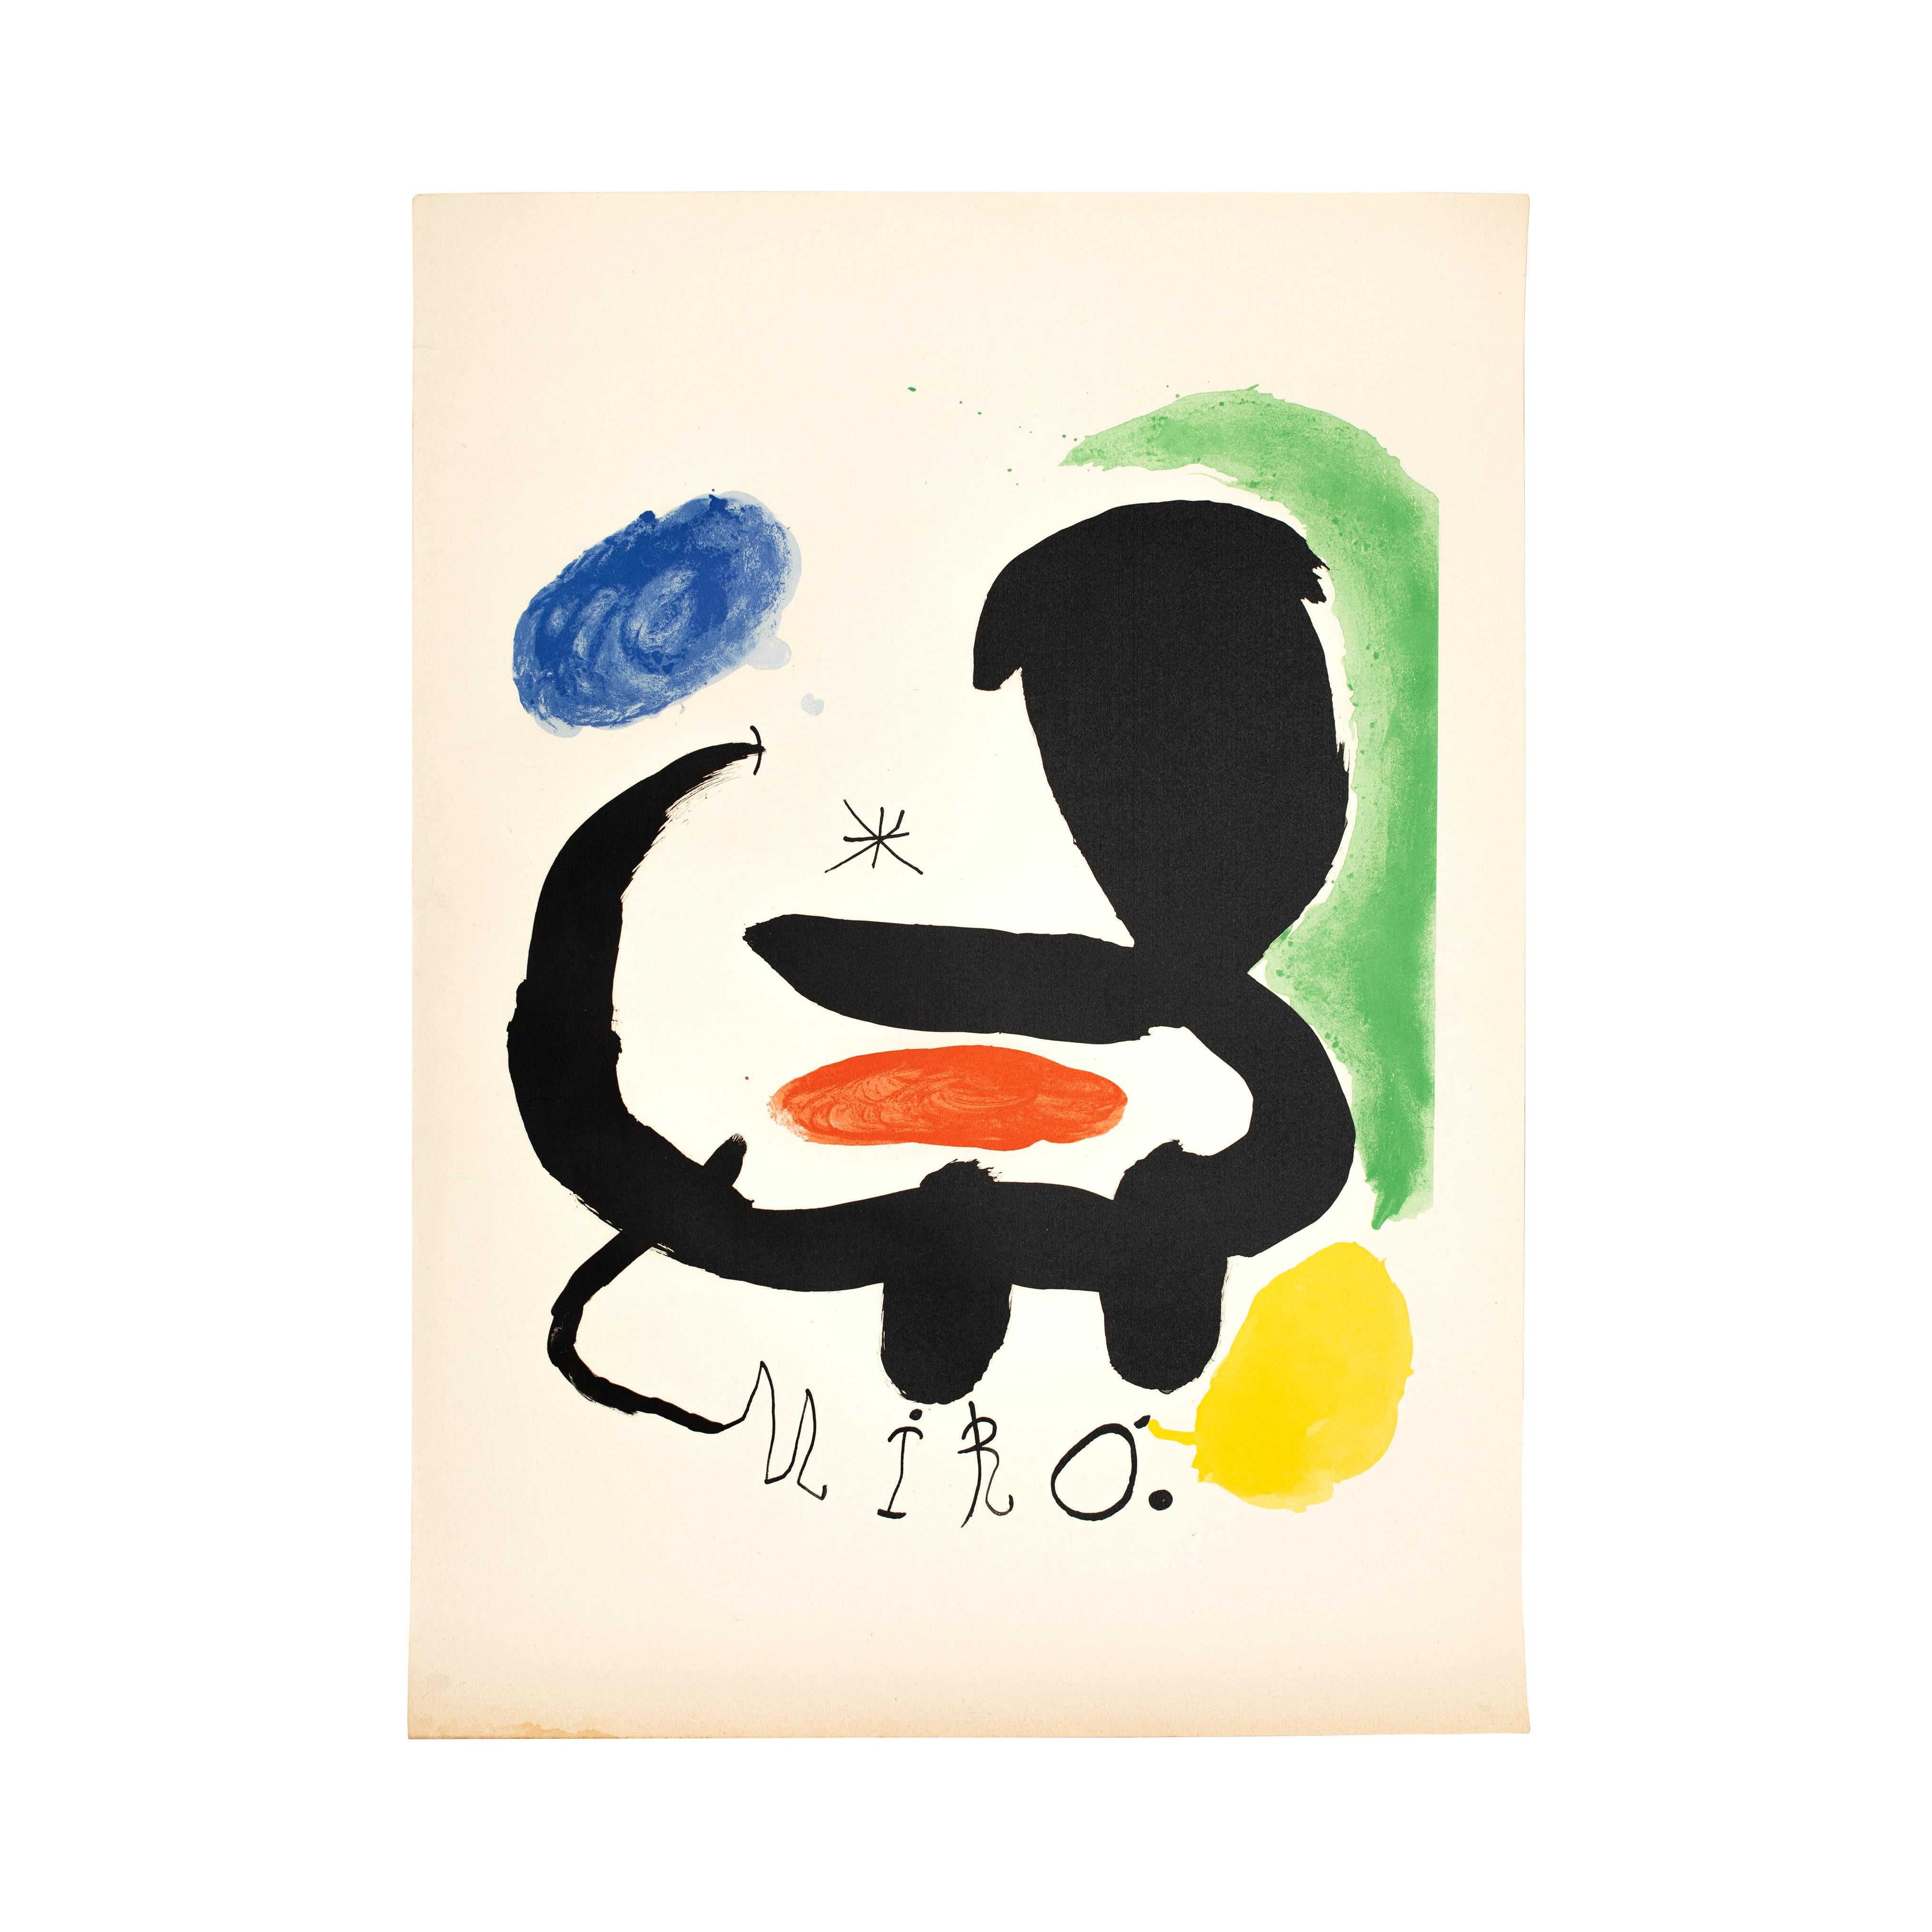 Lithography by Joan Miro, circa 1950

Signed on the stone.

In original condition, with minor wear consistent with age and use, preserving a beautiful patina.

Joan Miró i Ferrà (Catalan) 20 April 1893 – 25 December 1983) was a Catalan,